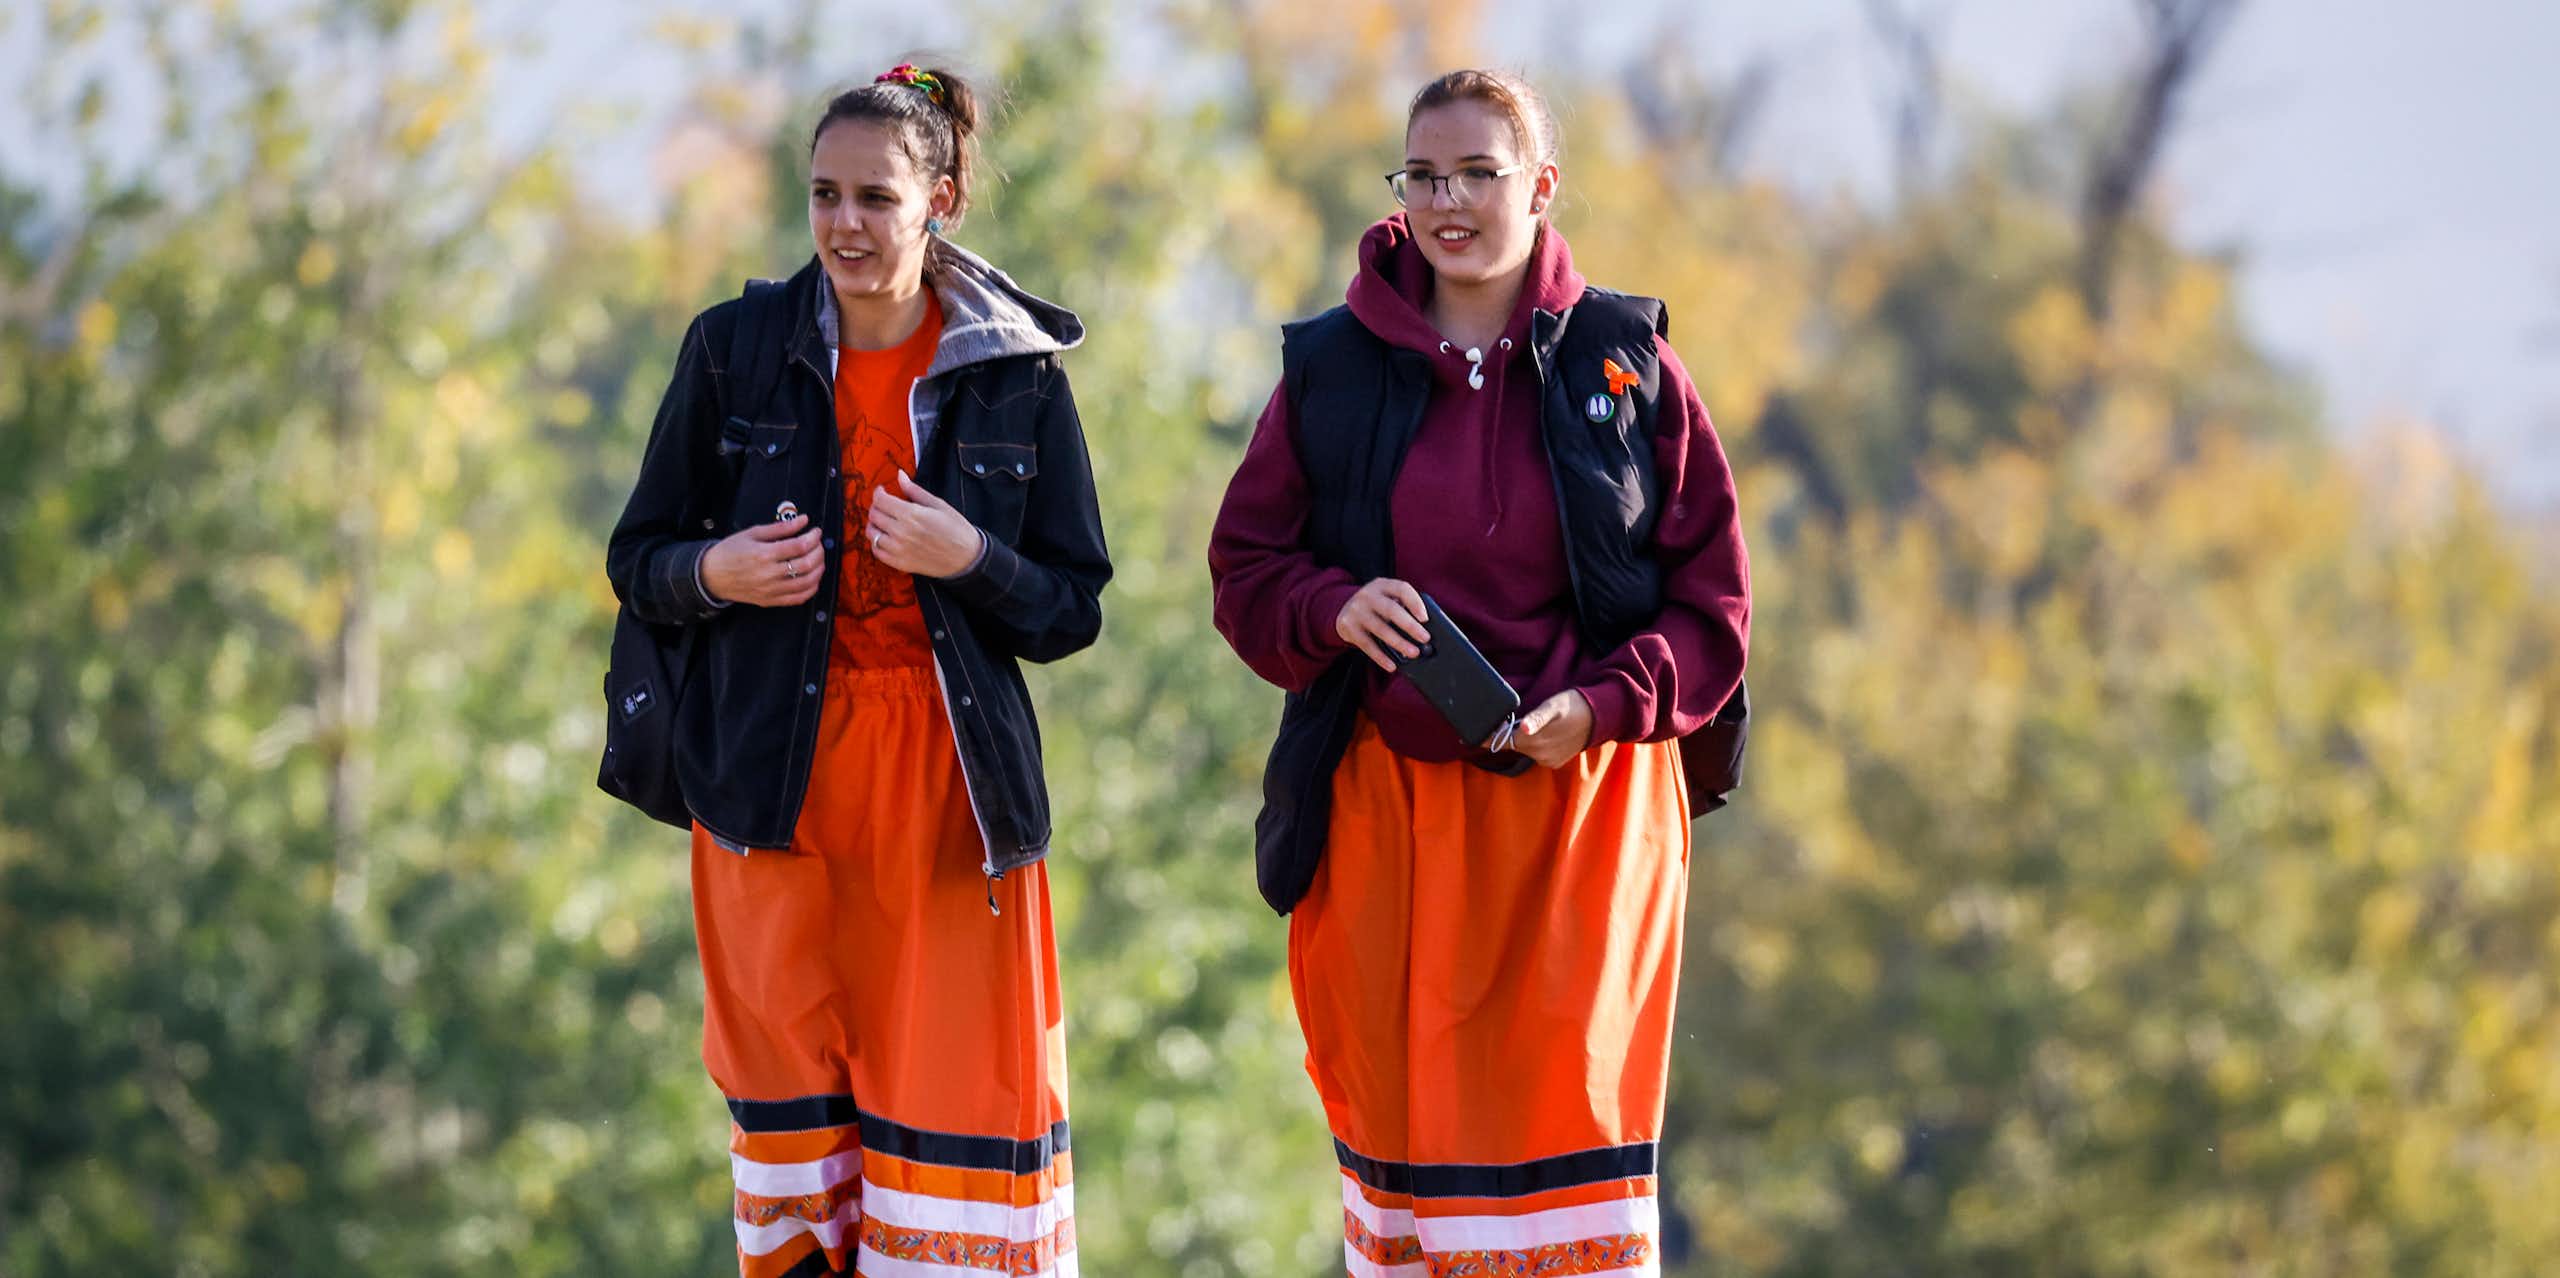 Two young women walk side by side wearing orange ribbon skirts and black jackets in an open green area